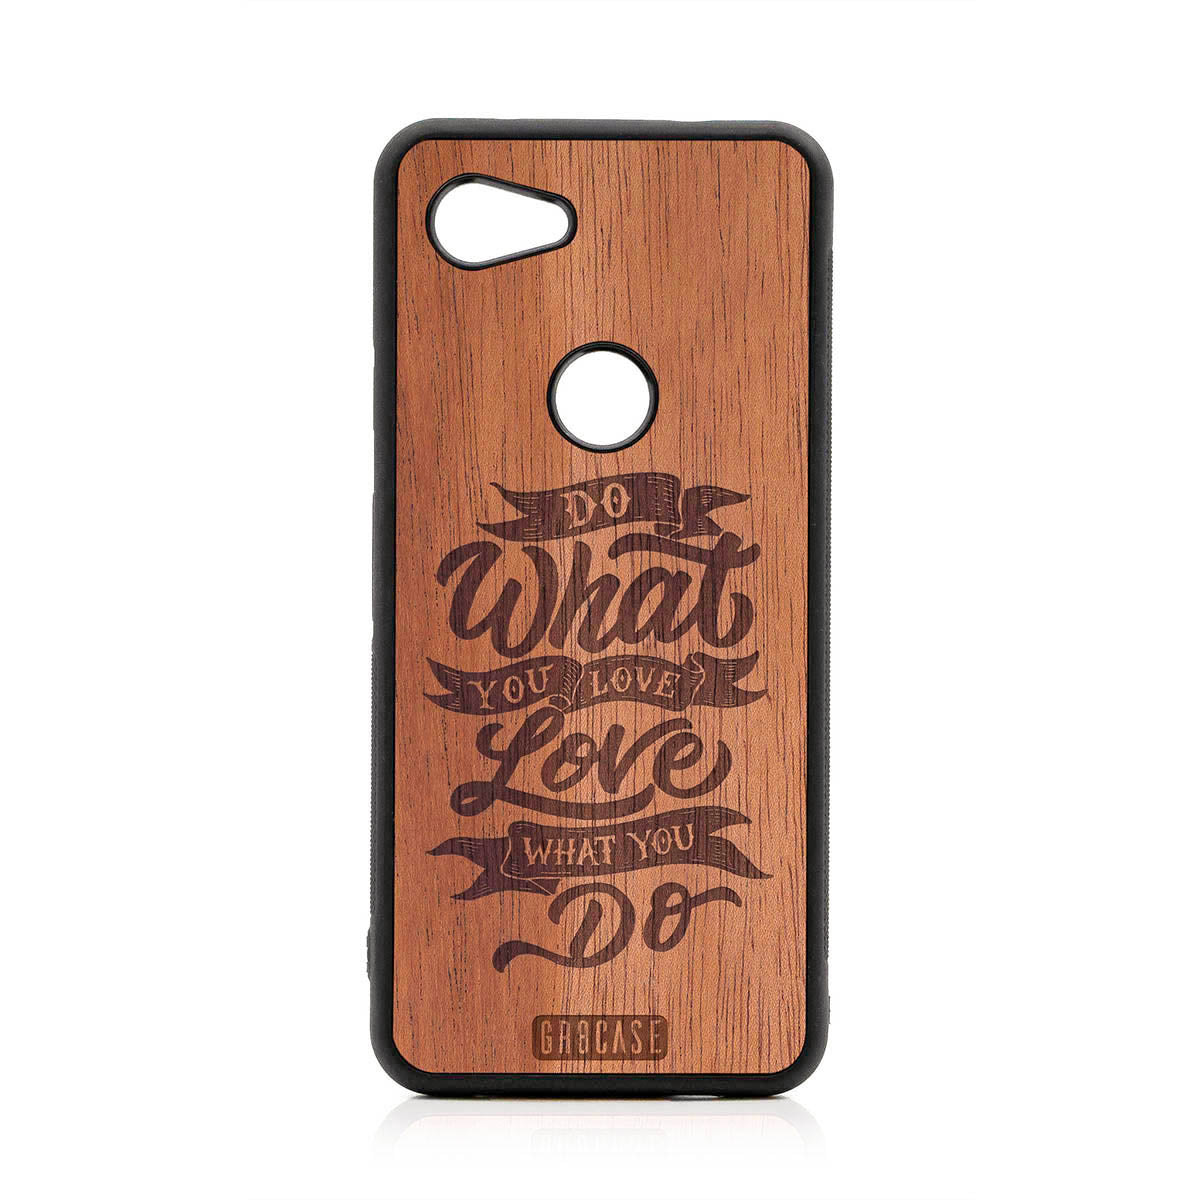 Do What You Love Love What You Do Design Wood Case For Google Pixel 3A XL by GR8CASE